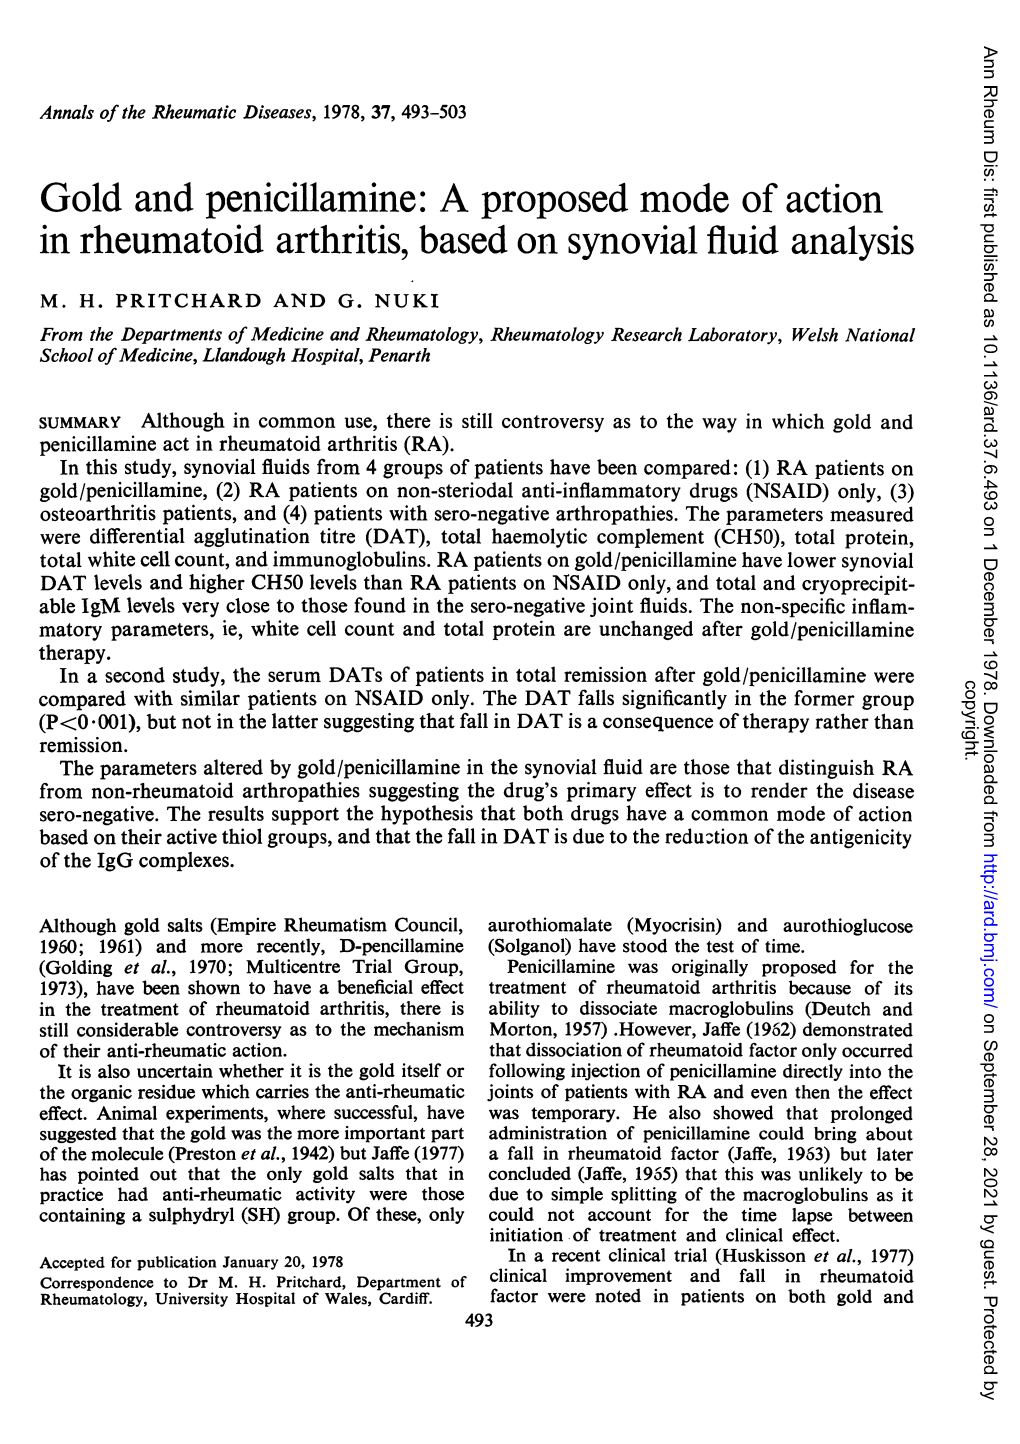 Gold and Penicillamine: a Proposed Mode of Action in Rheumatoid Arthritis, Based on Synovial Fluid Analysis